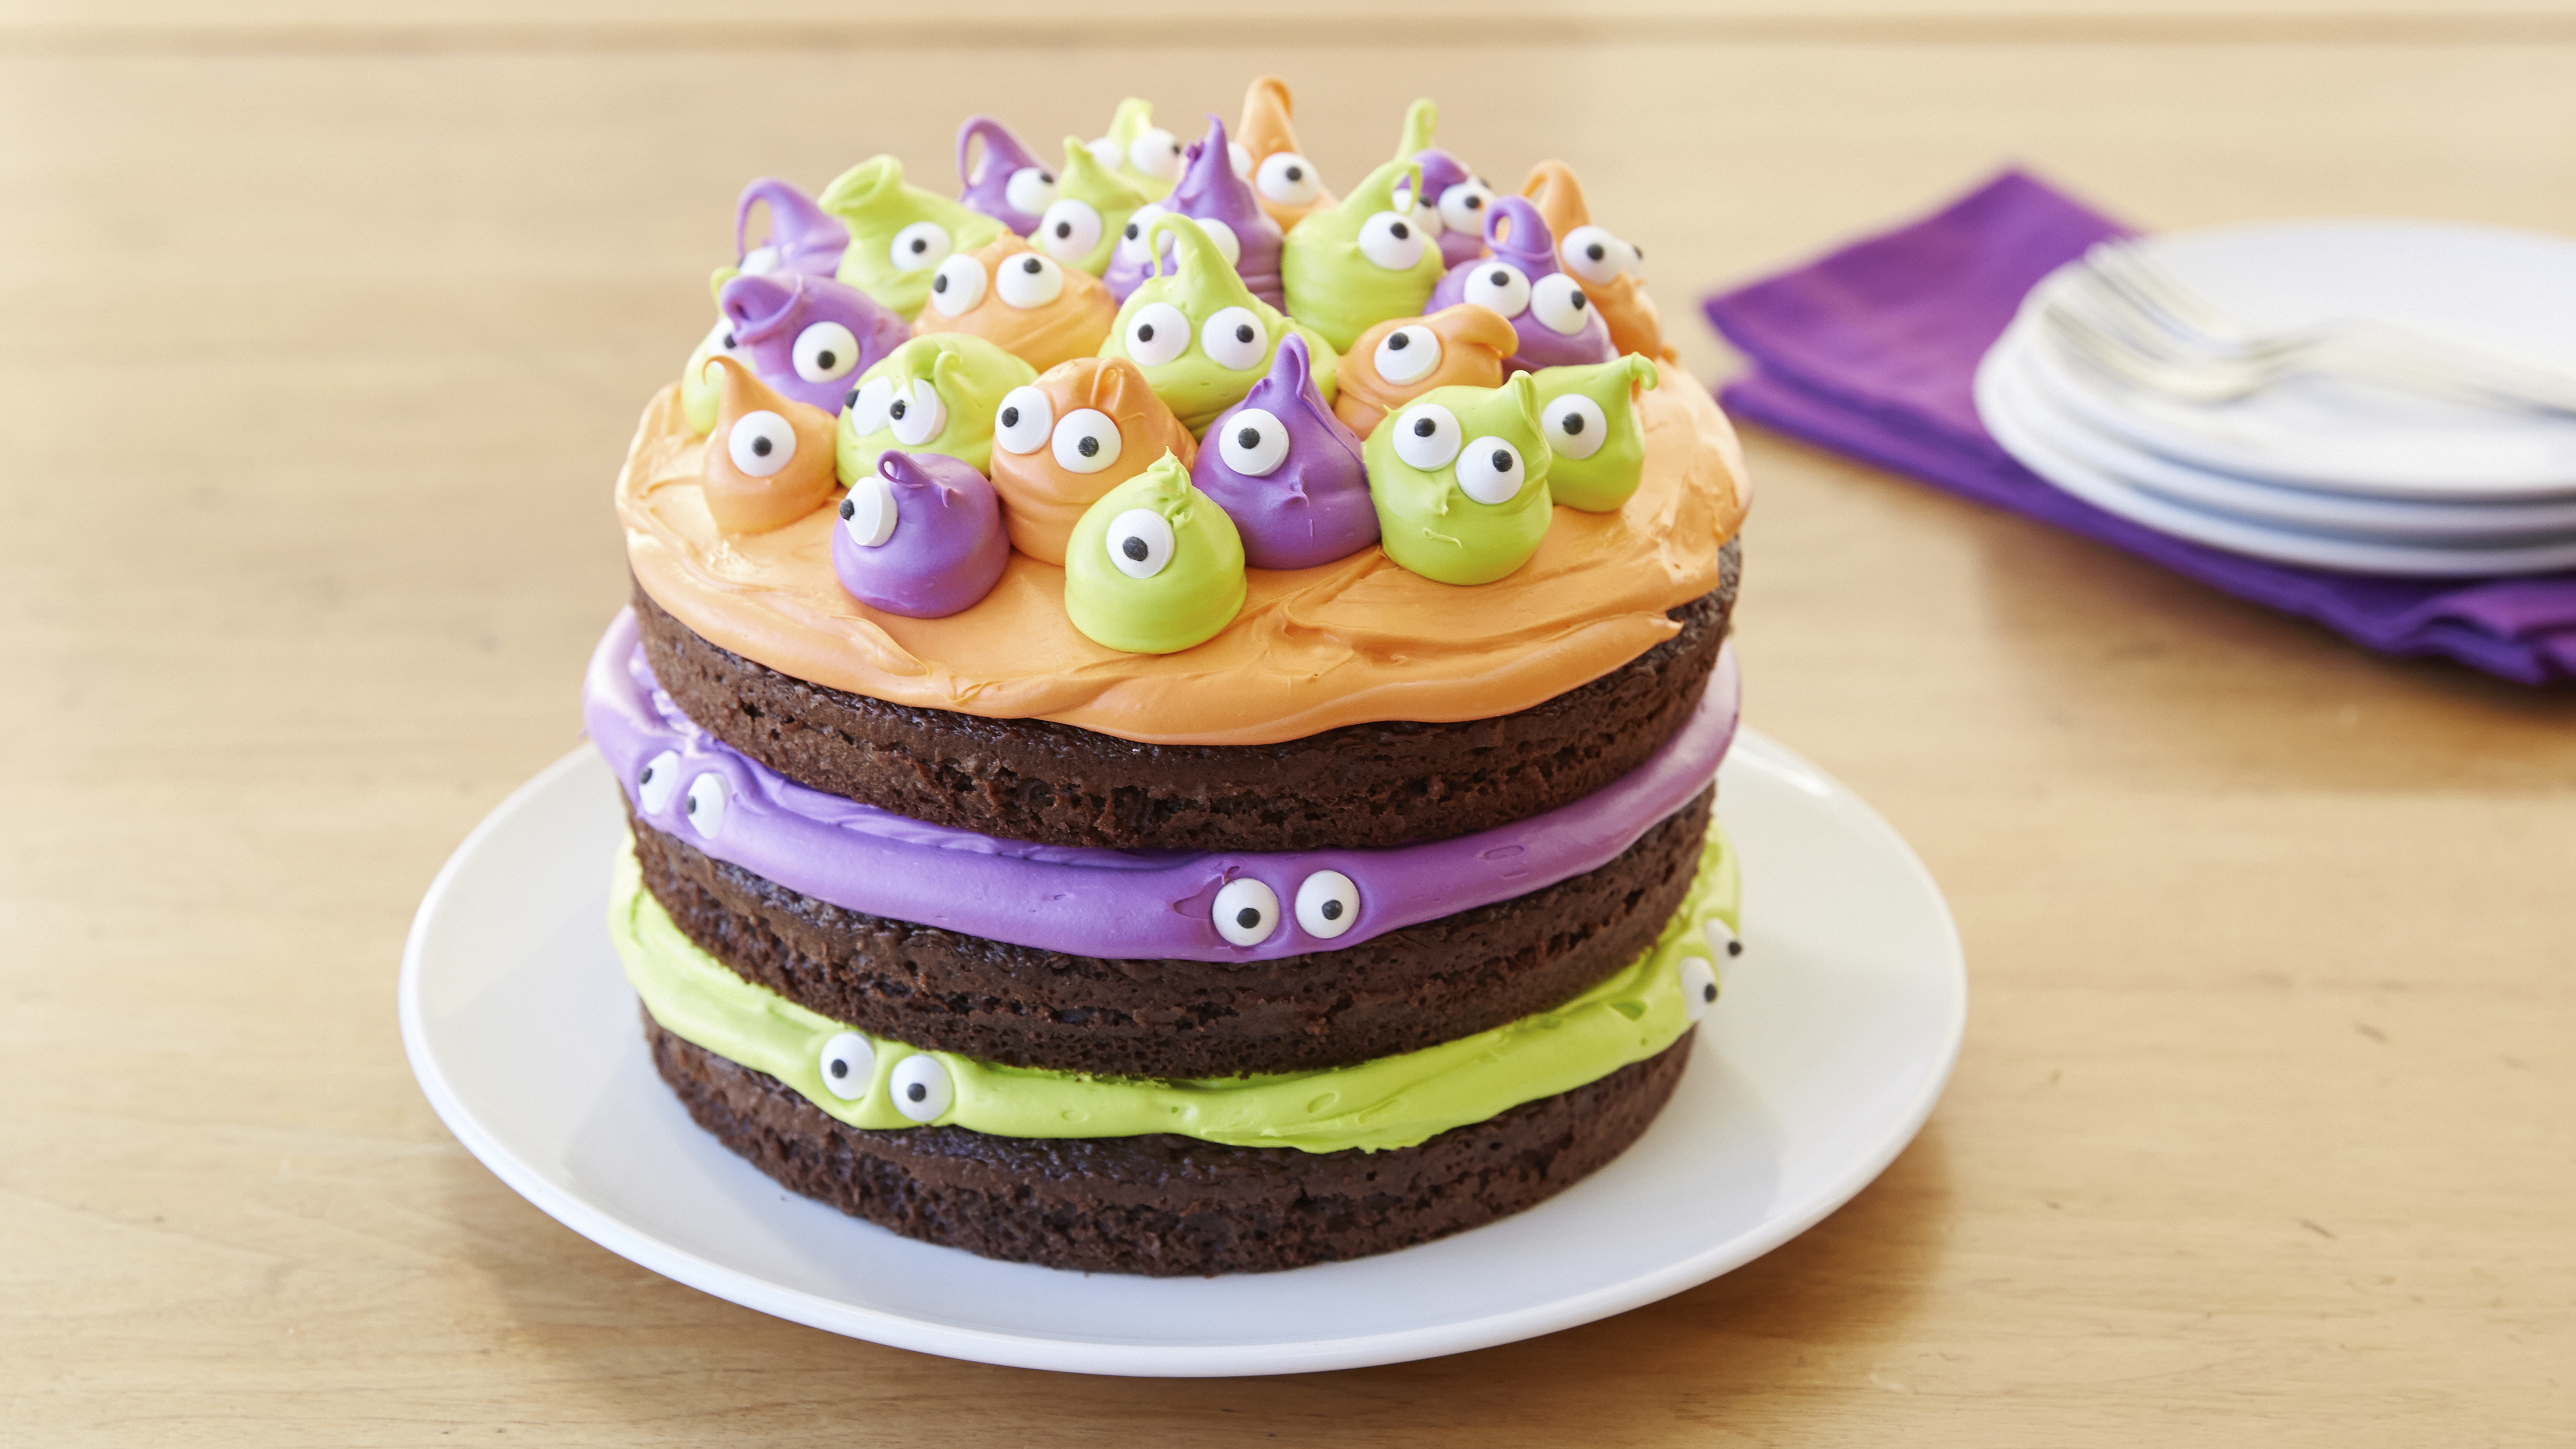 Easy Halloween Cake - Two Sisters